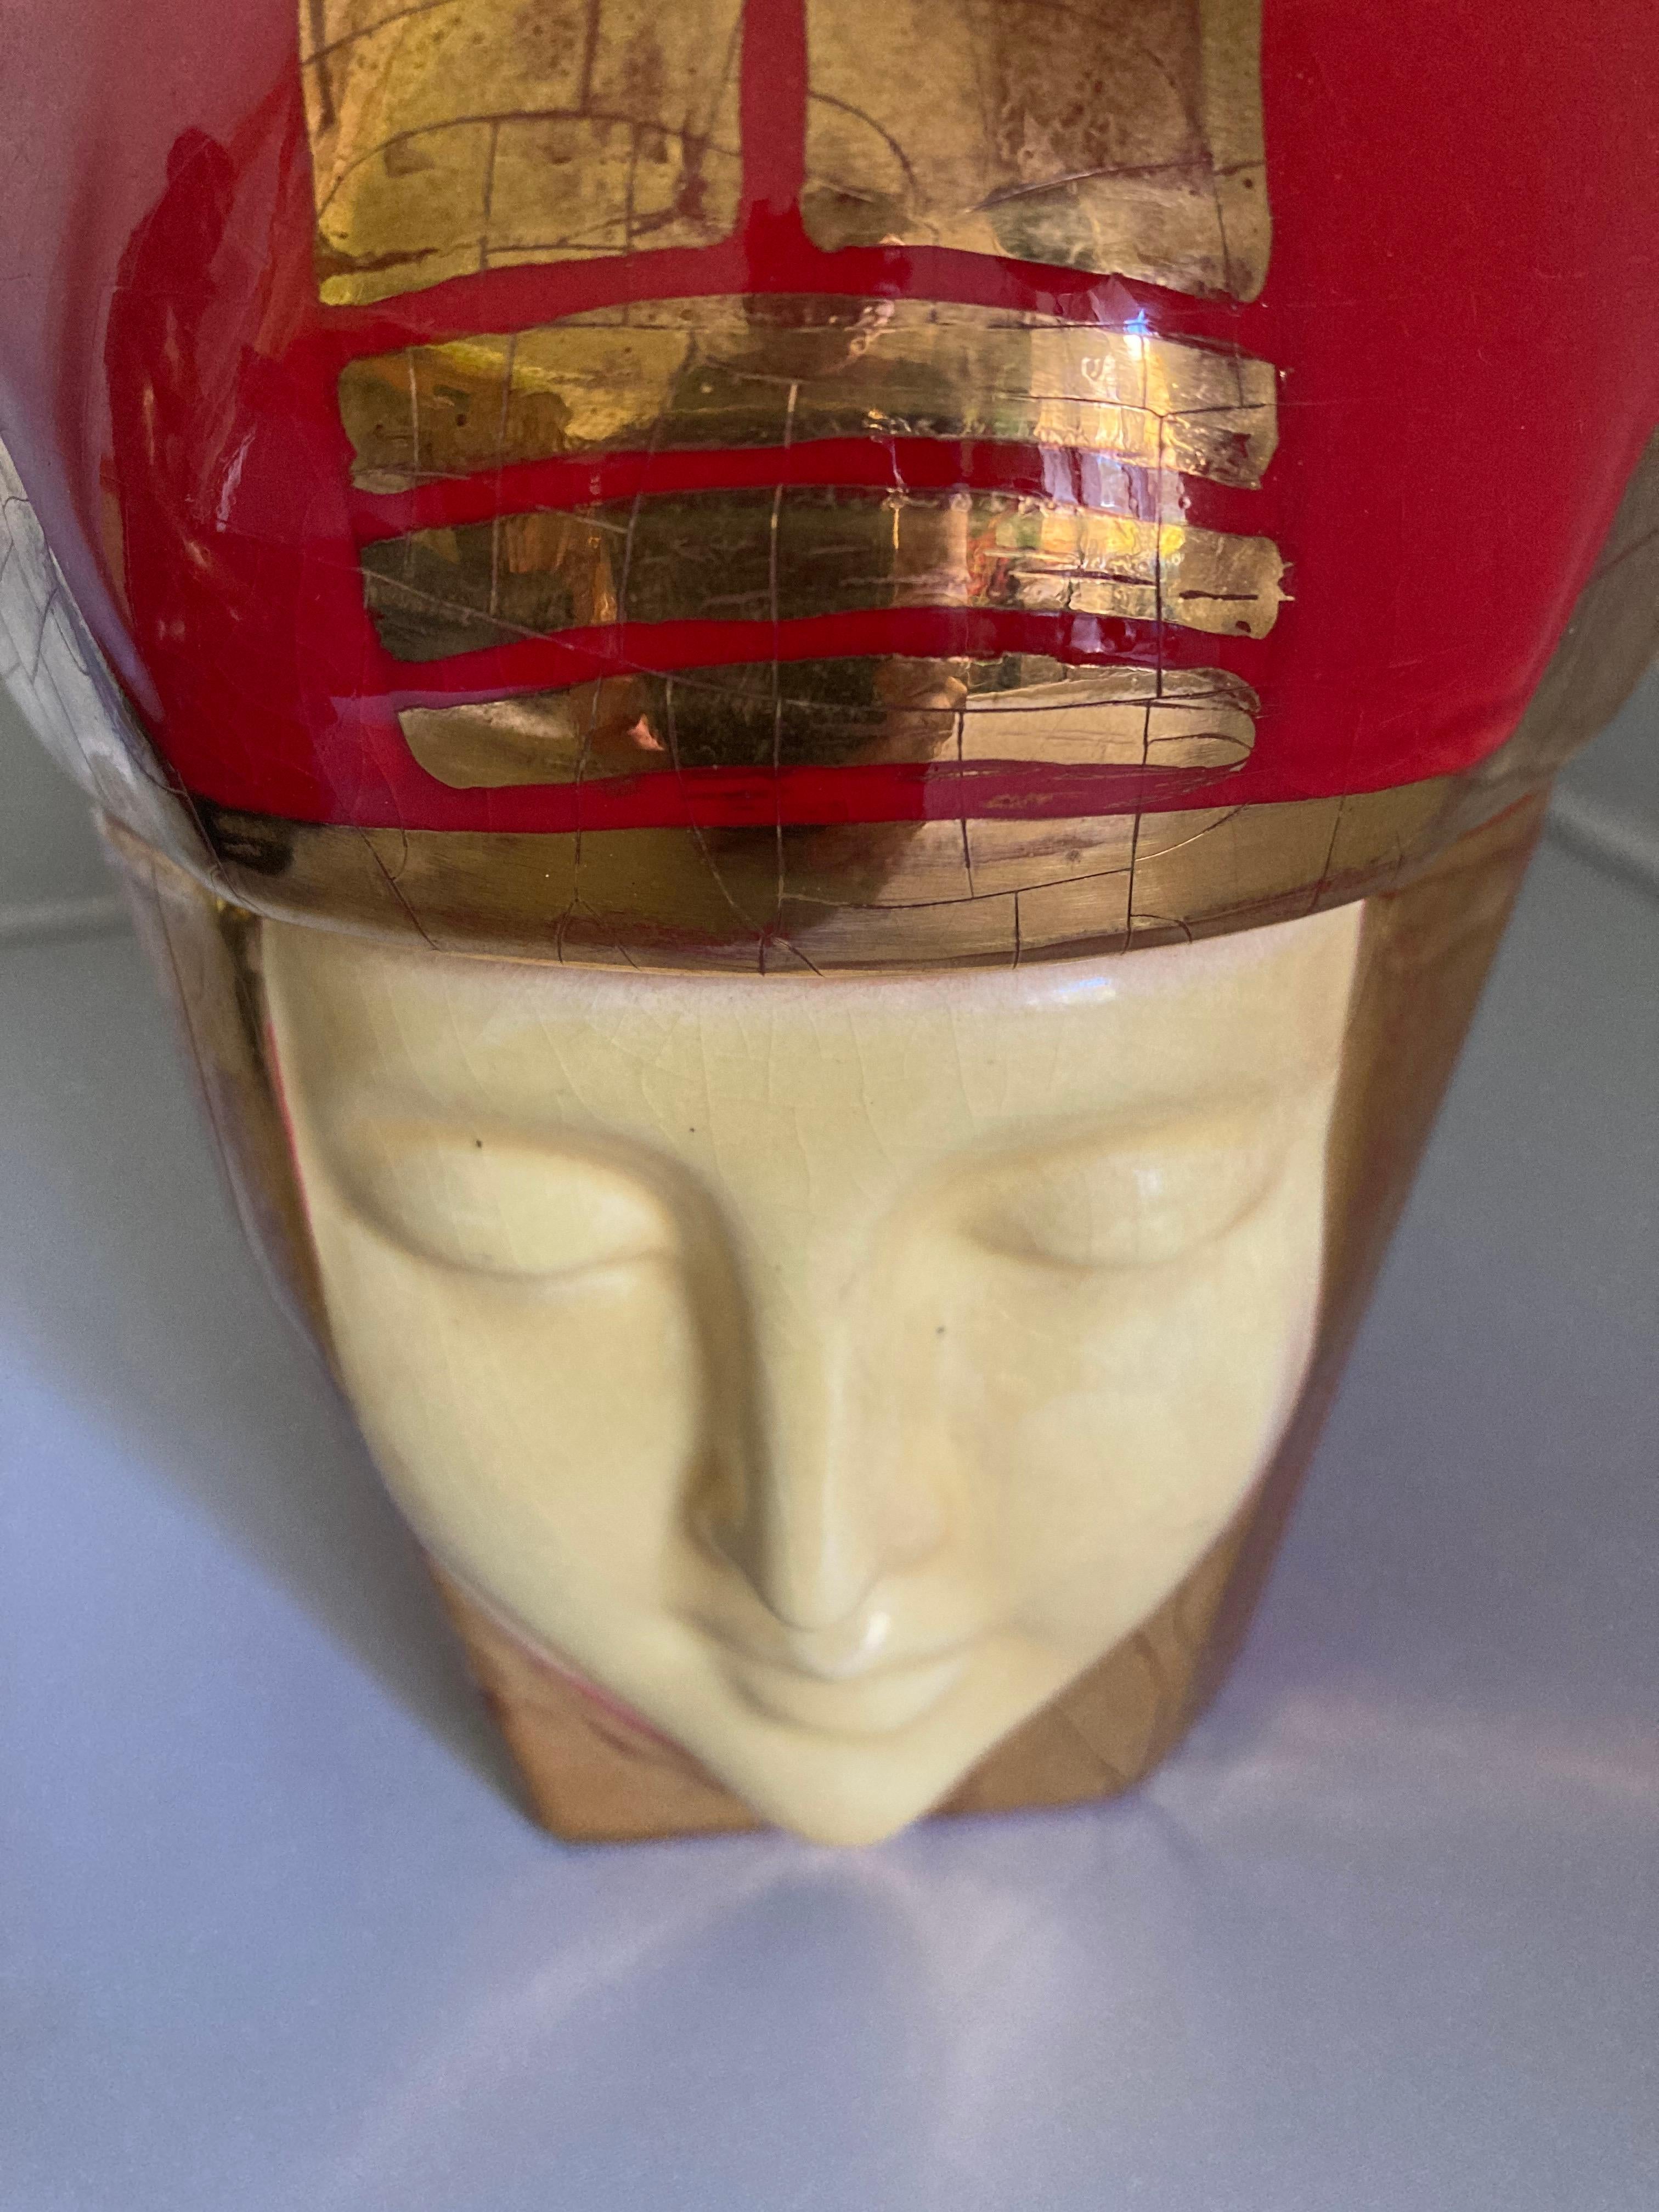 Decorative ceramic Bonbonniere by Robj, Paris from the period of 1925-1930. Original condition, no repairs or restoration.
Bright colors and metalic gold enamel. Woman with crown and gold lines. This figure is beautiful rendered with two parts, top